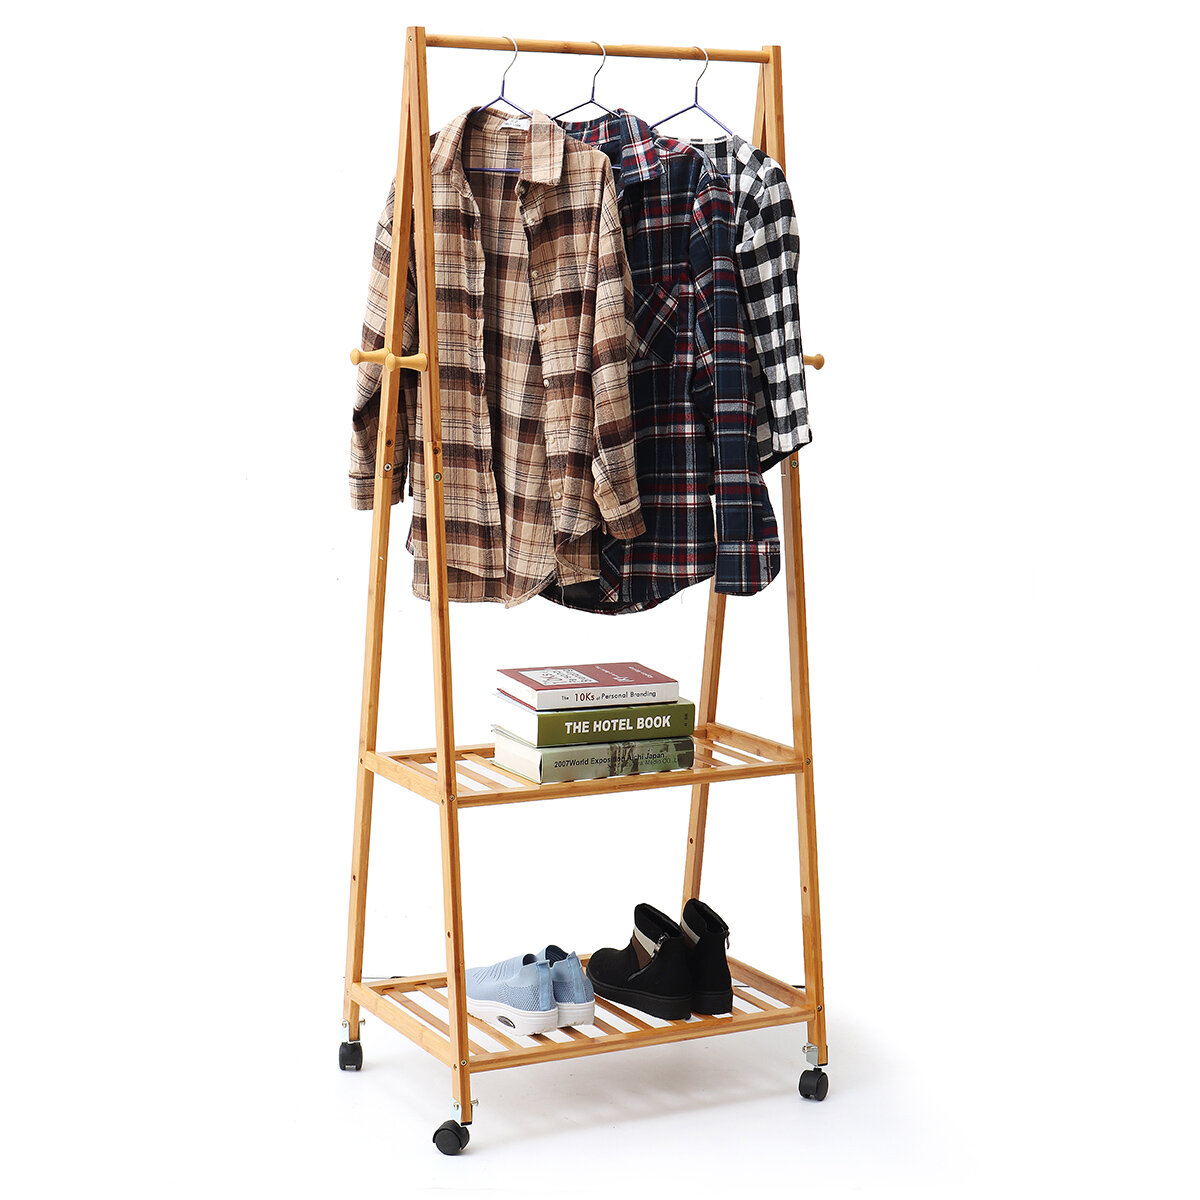 

Bamboo Clothes Garment Clothes Hanging Rack Display Coat Storage Shelf with Wheels